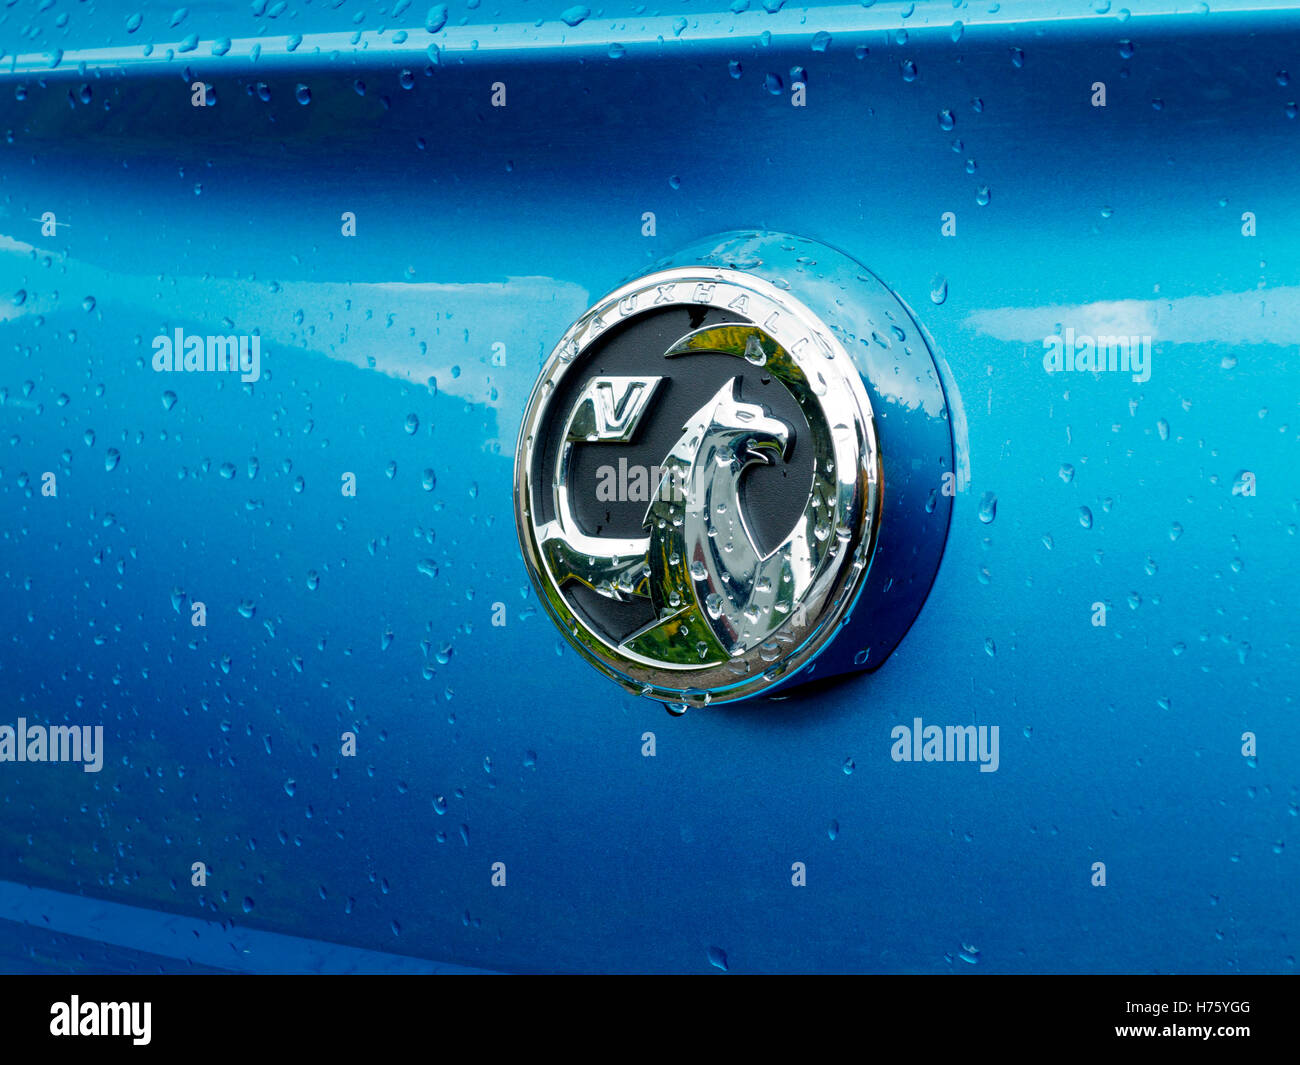 Close up view of metallic blue 2016 model Vauxhall Corsa car with water drops on body and logo Stock Photo